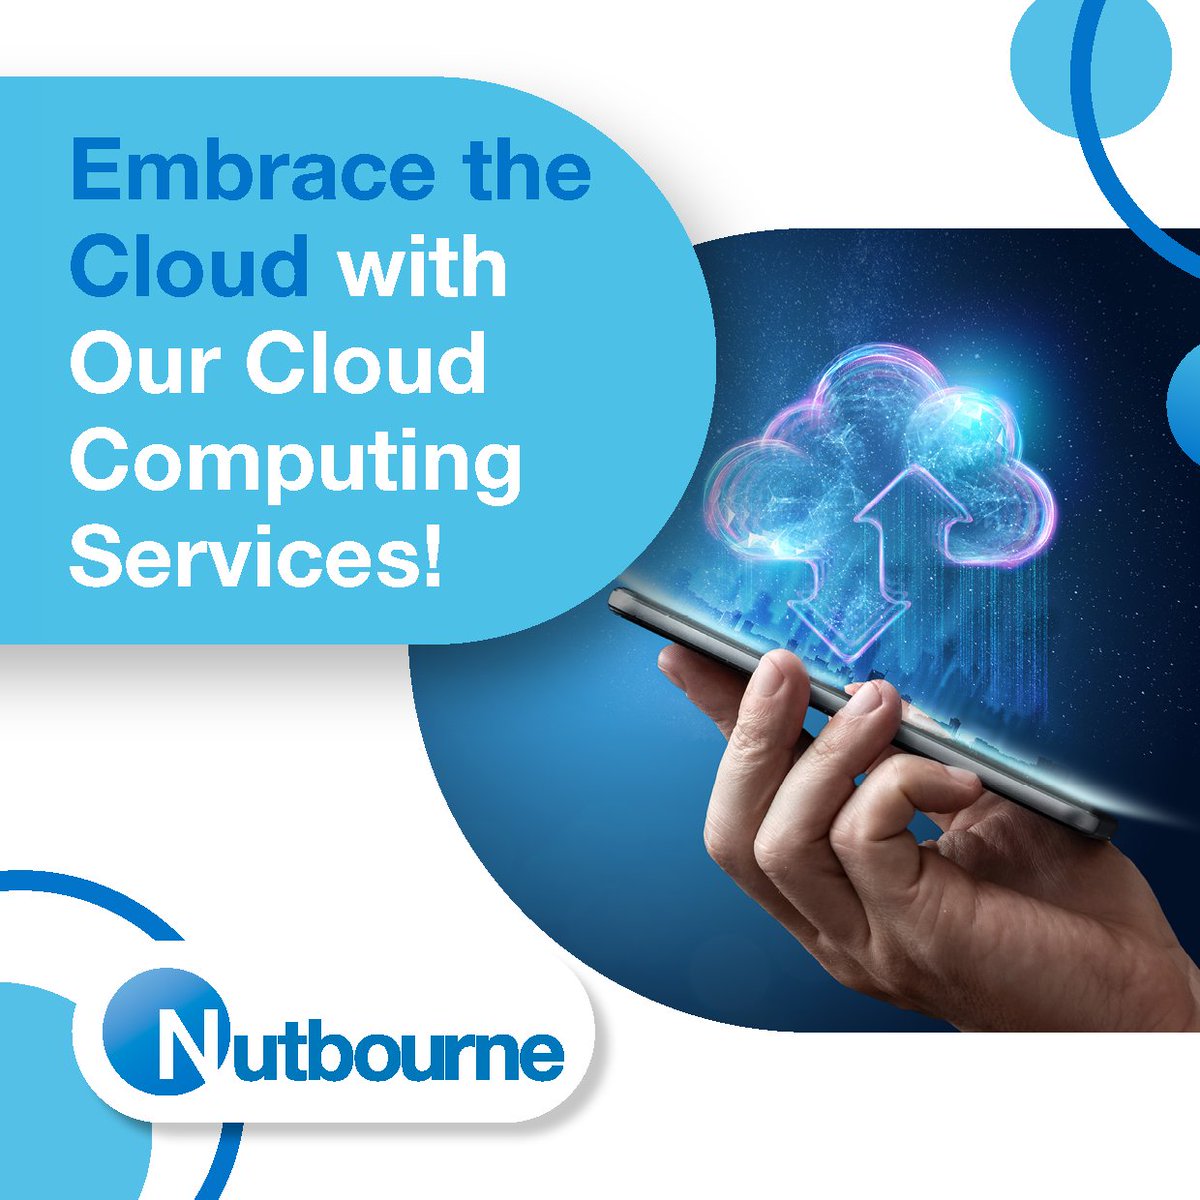 In today's digital world, cloud computing is transforming the way businesses operate. Whether you need cloud migration, data backup and recovery, or cloud infrastructure management, our experts can help you leverage the full potential of cloud technology. Contact us today.